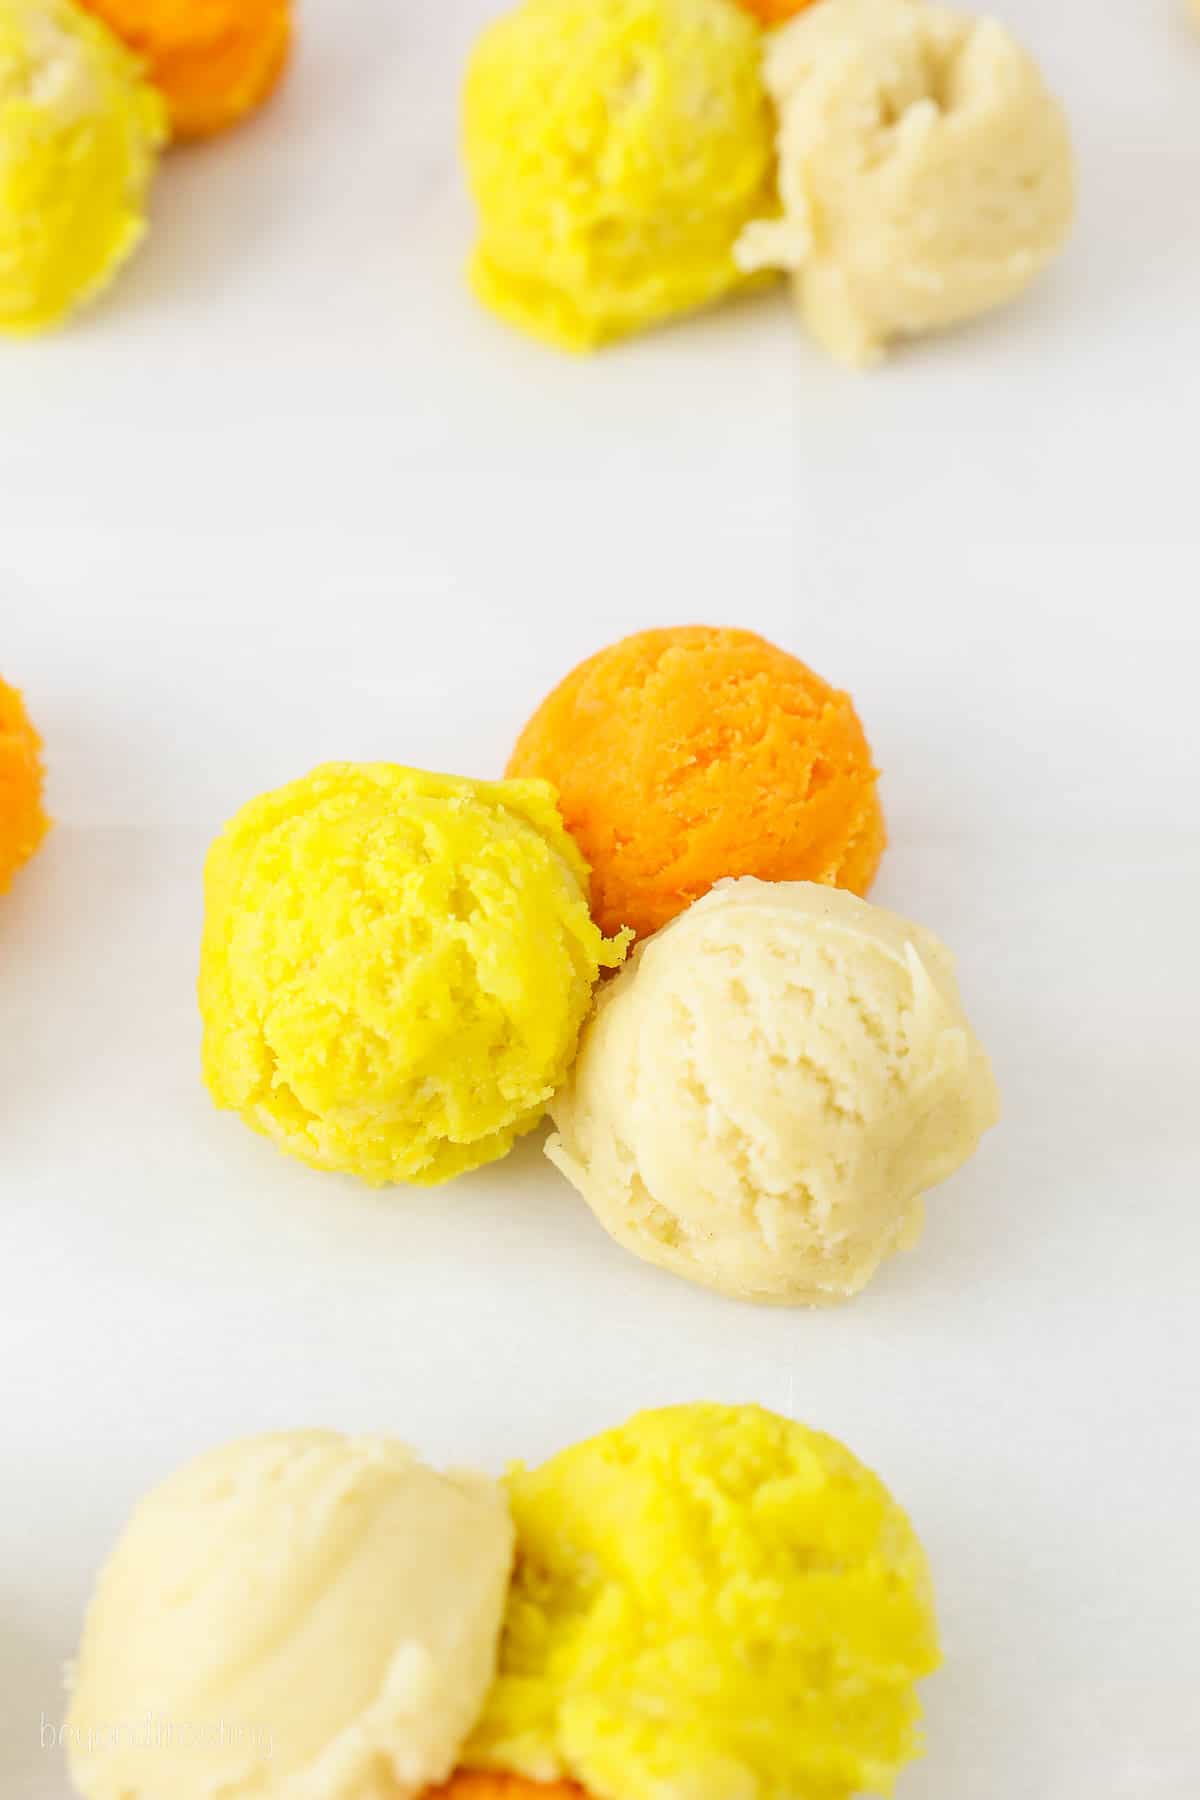 Scoops of white, orange, and yellow sugar cookie dough arranged in groups of three on a white surface.